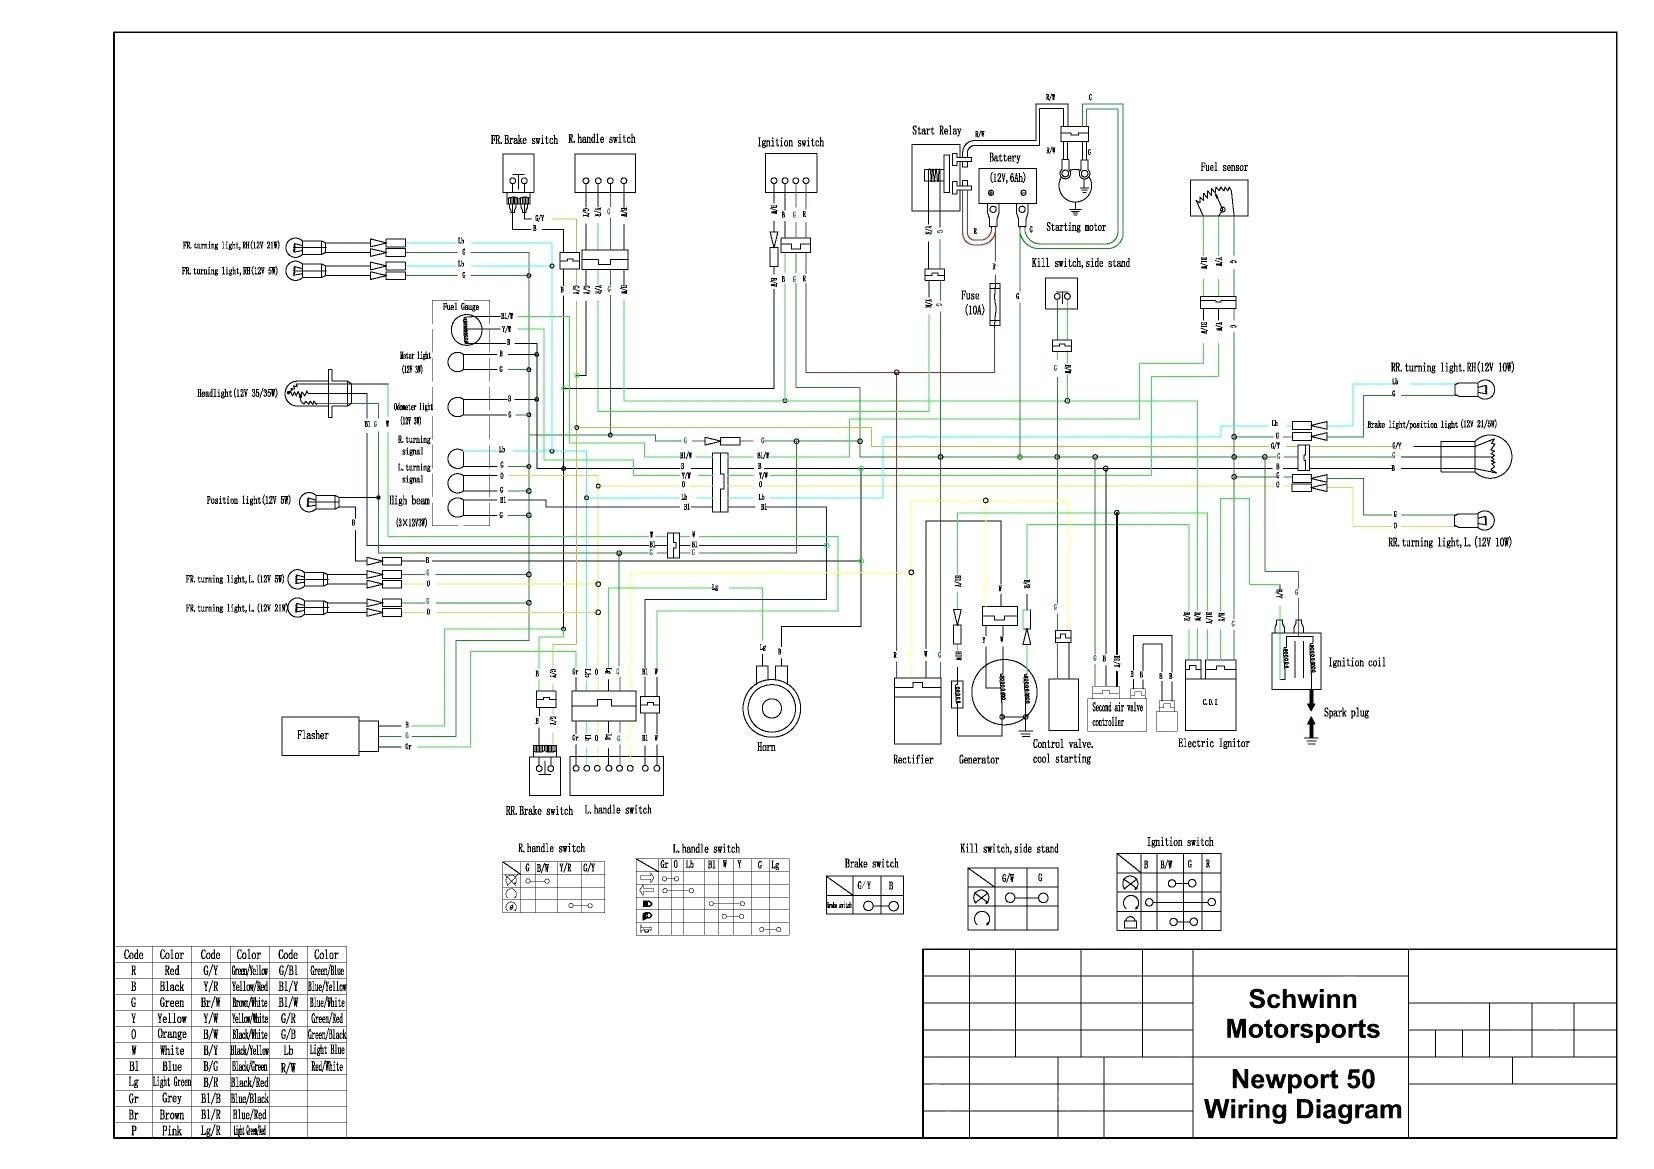 Wiring Diagram for Electric Razor Scooter Fresh Wiring Diagram for Electric Razor Scooter Copy Moped Wiring